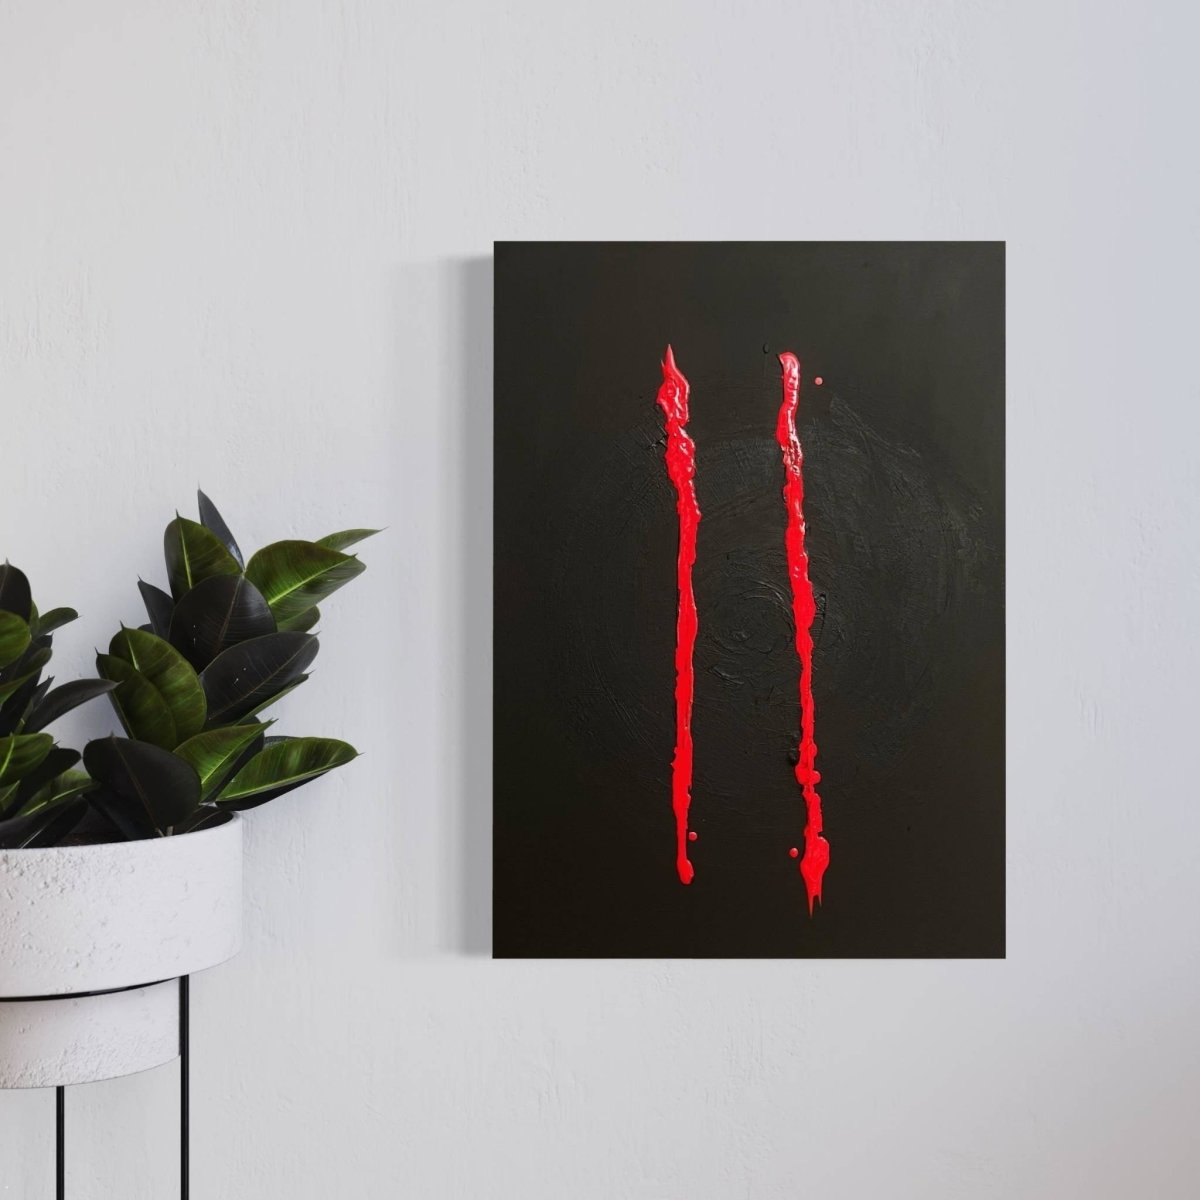 Existence and Live Original Painting on Canvas - Artchi